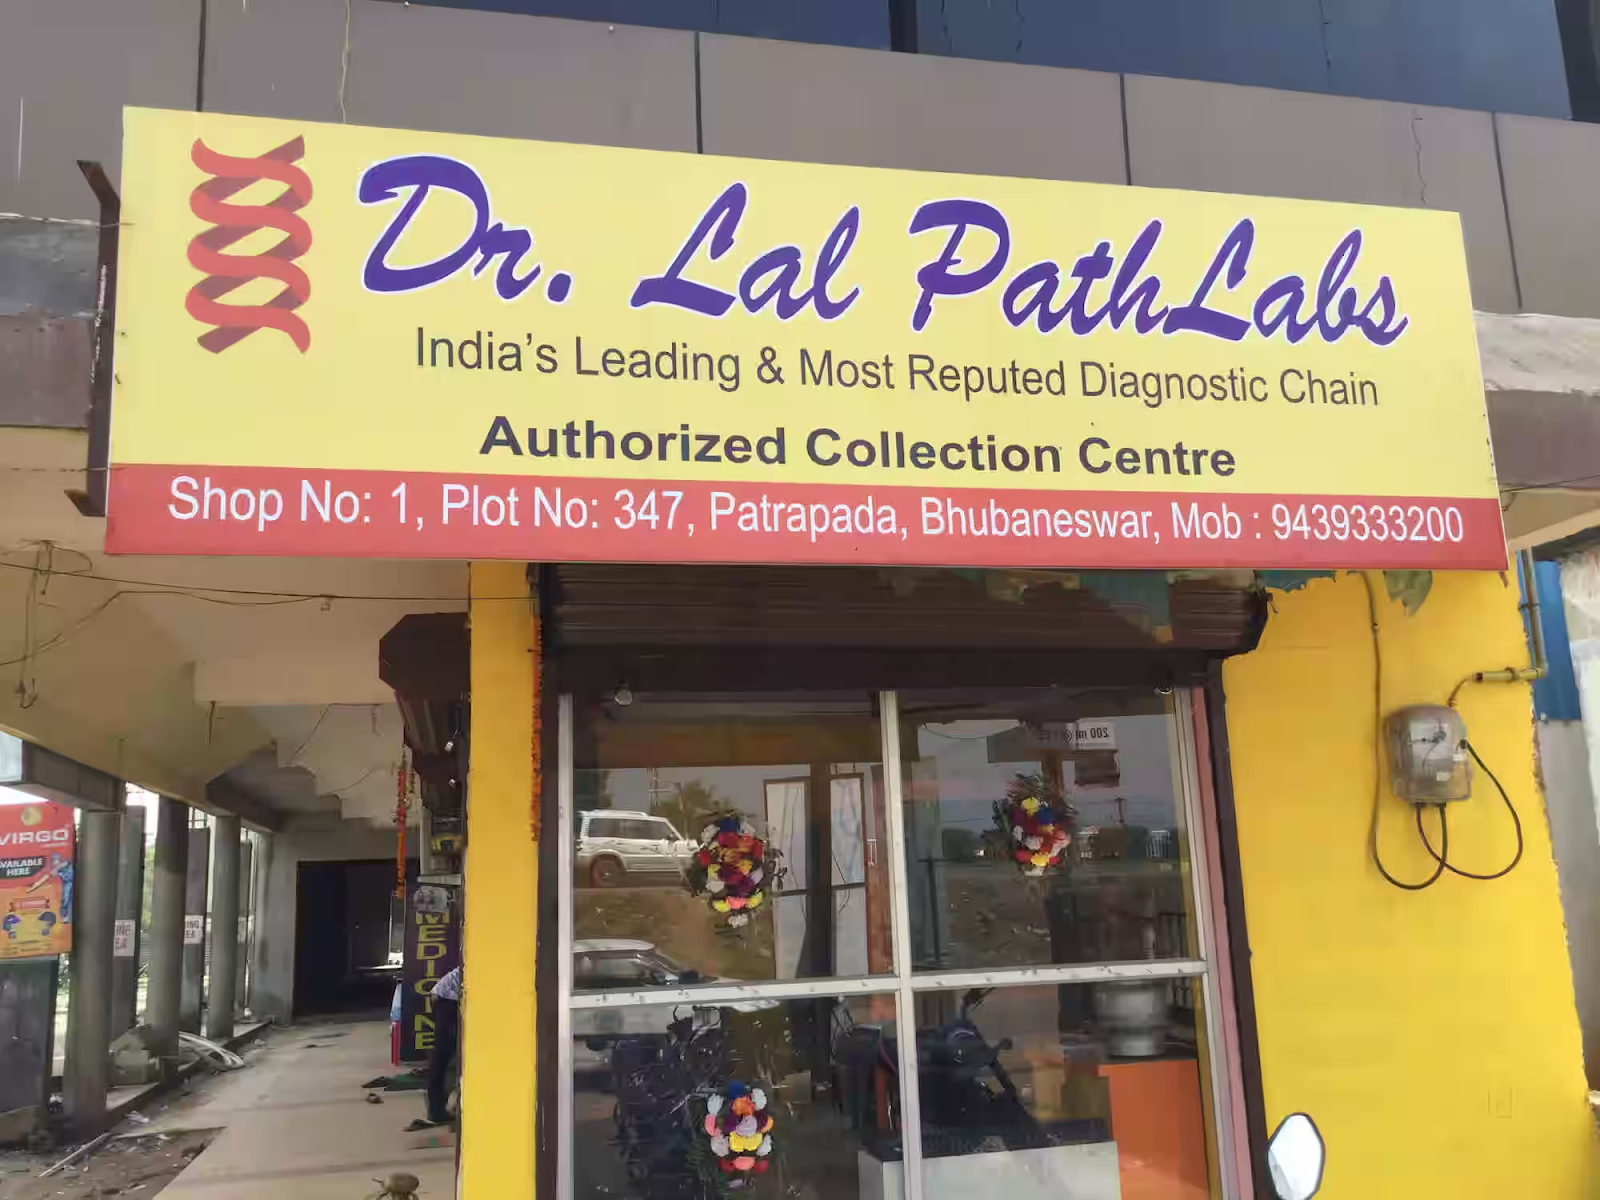 2. Lal PathLabs